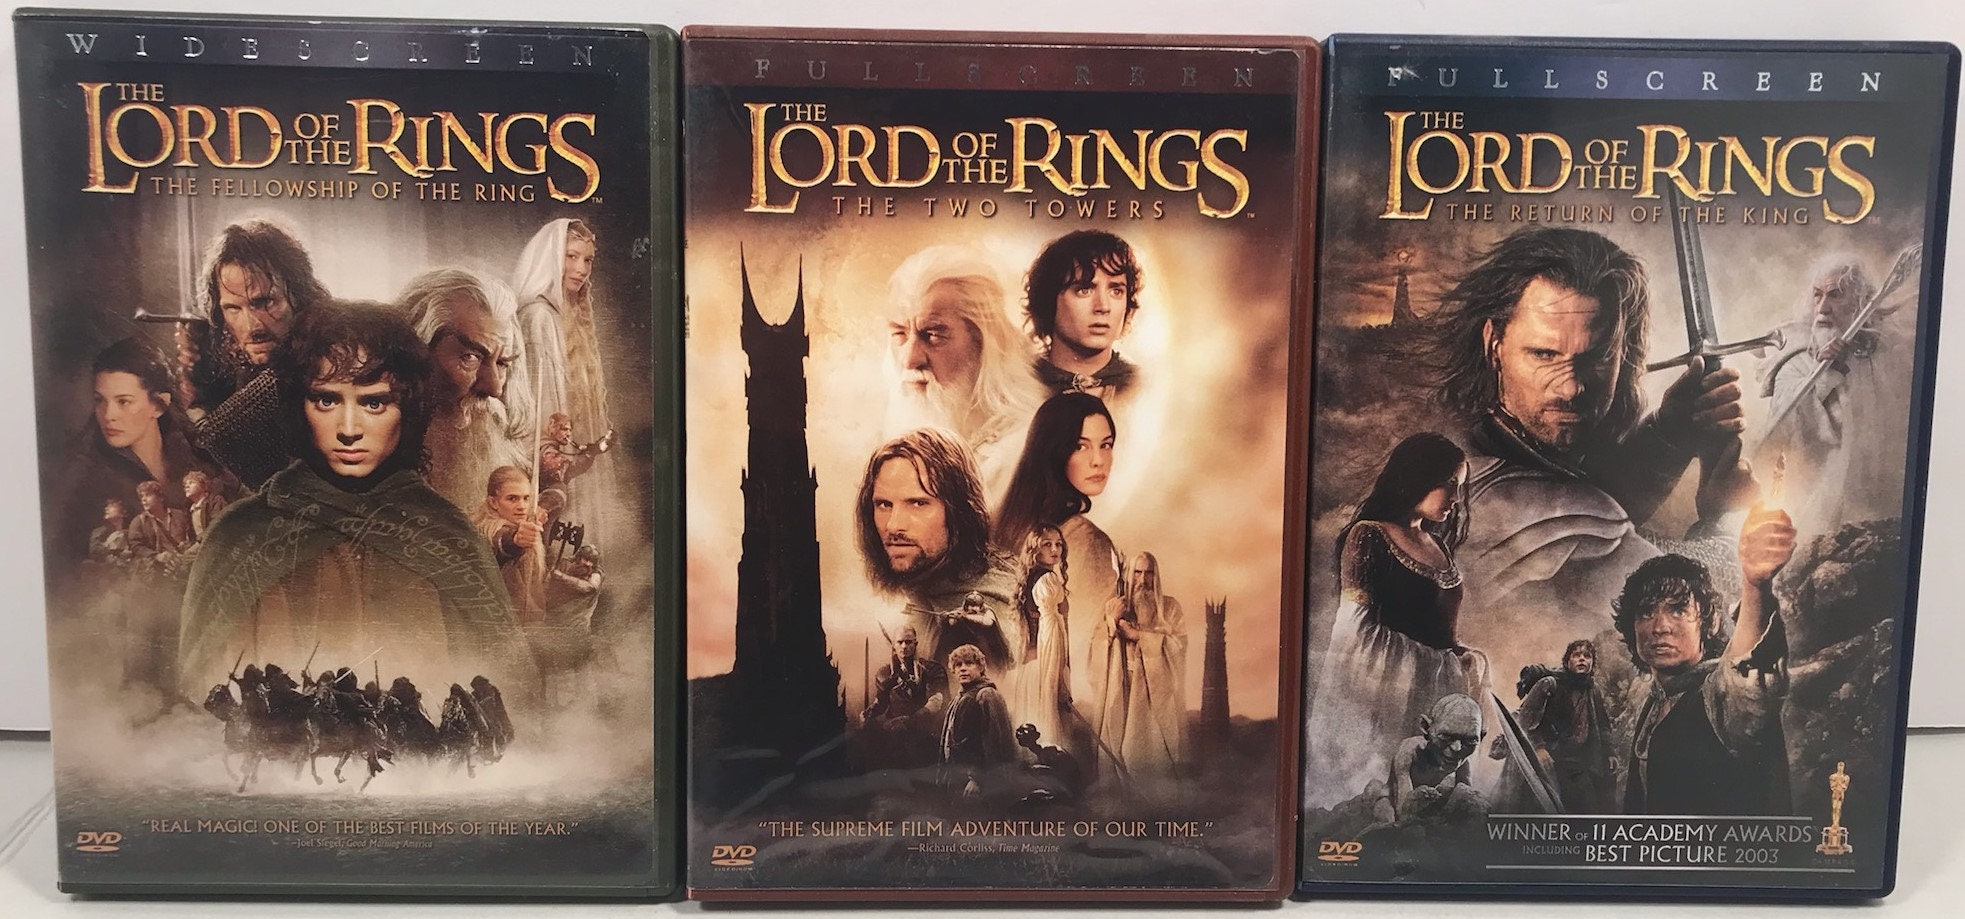 Read and Download the 'Lord of the Rings' Trilogy Screenplays